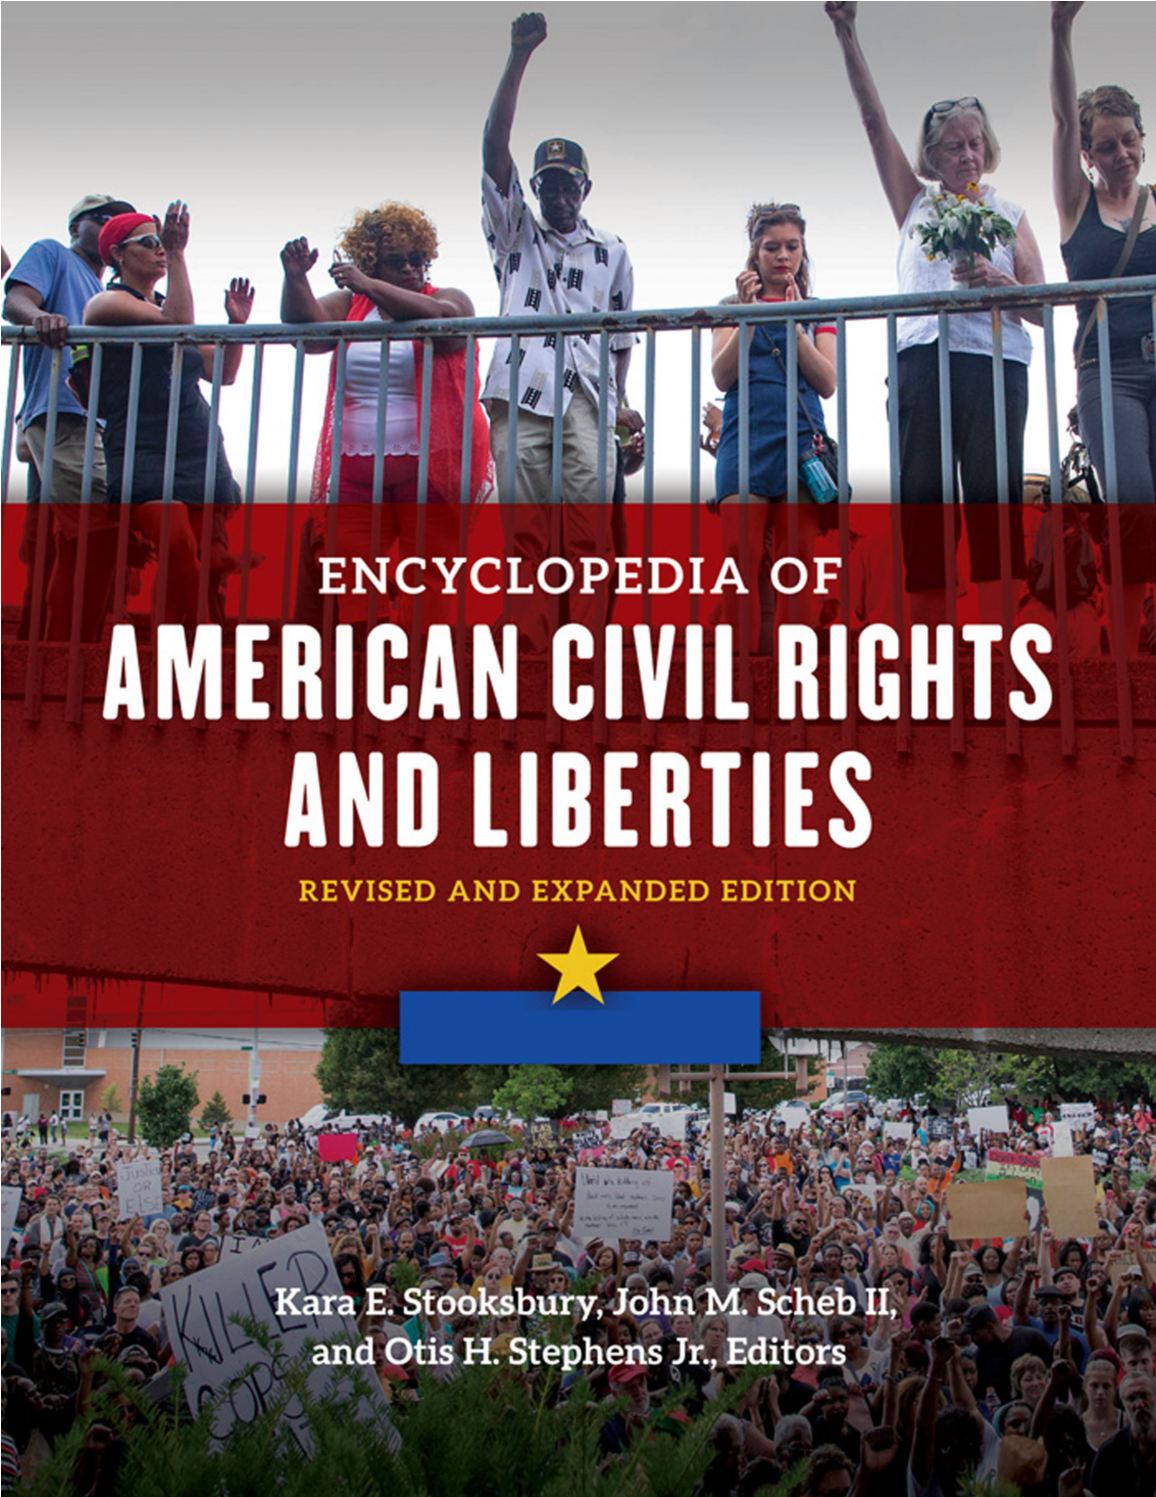 Encyclopedia of American Civil Rights and Liberties: Revised and Expanded Edition, 2nd Edition [4 volumes] page Cover1